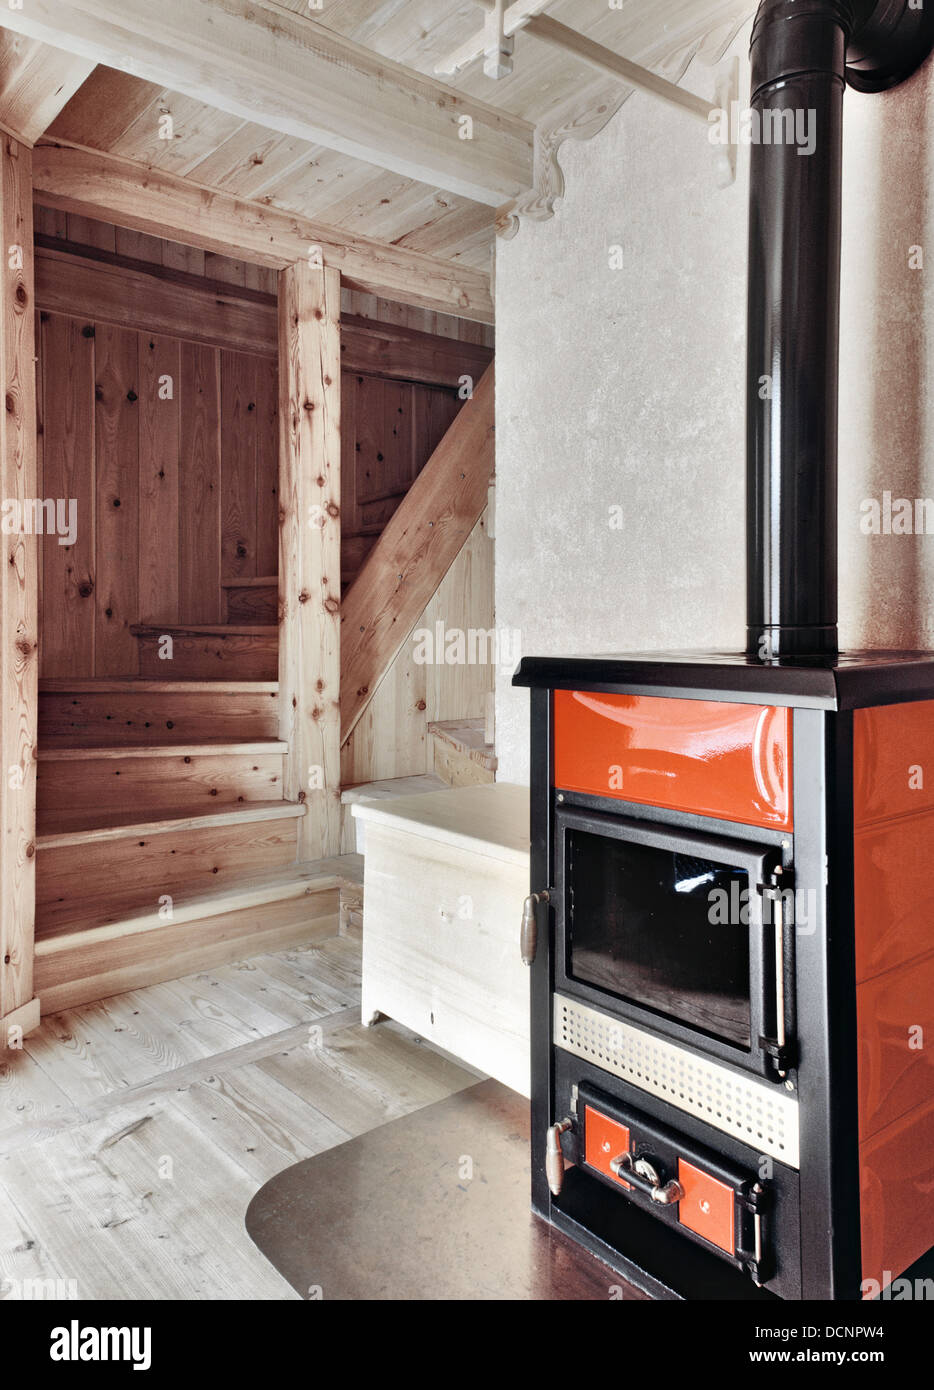 Red Stove Near To Rustic Wood Staircase With Wood Ceiling